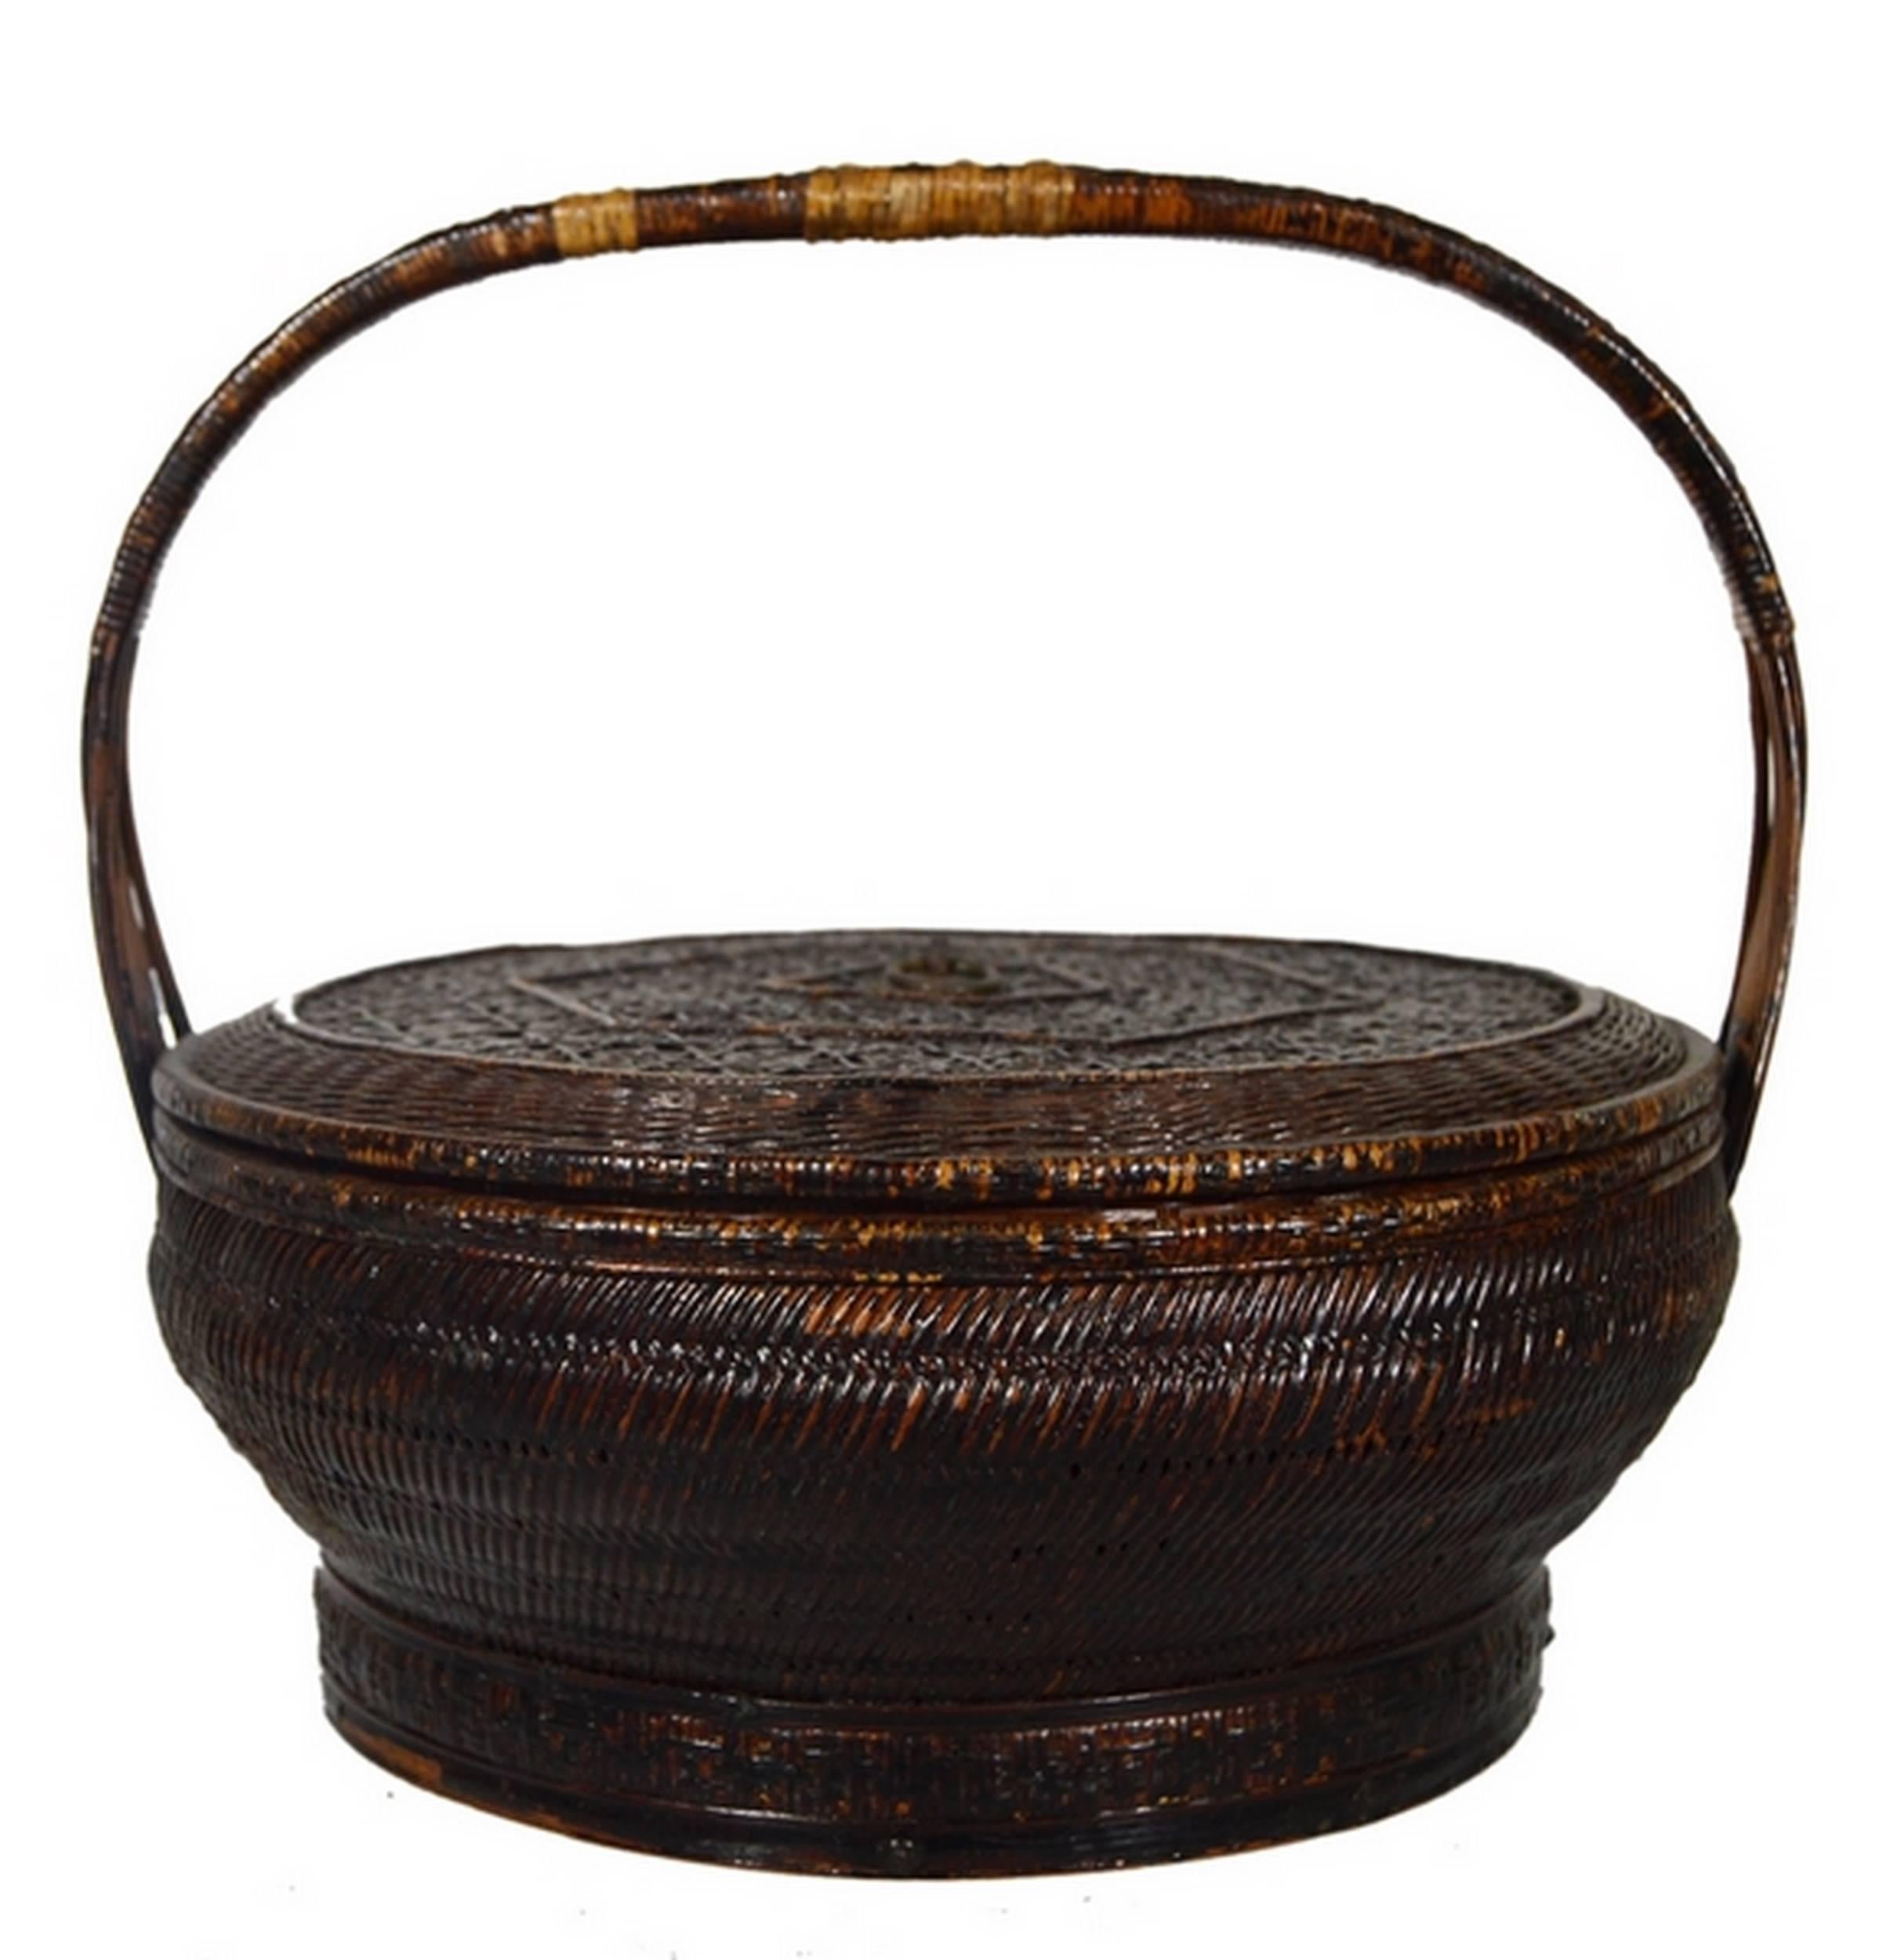 A small 19th century Chinese basket handwoven with rattan on a bamboo armature. This small round basket rests on a dark green painted base contrasting with its brown rattan exterior. The base is reinforced thanks to bamboo stretchers while the edge